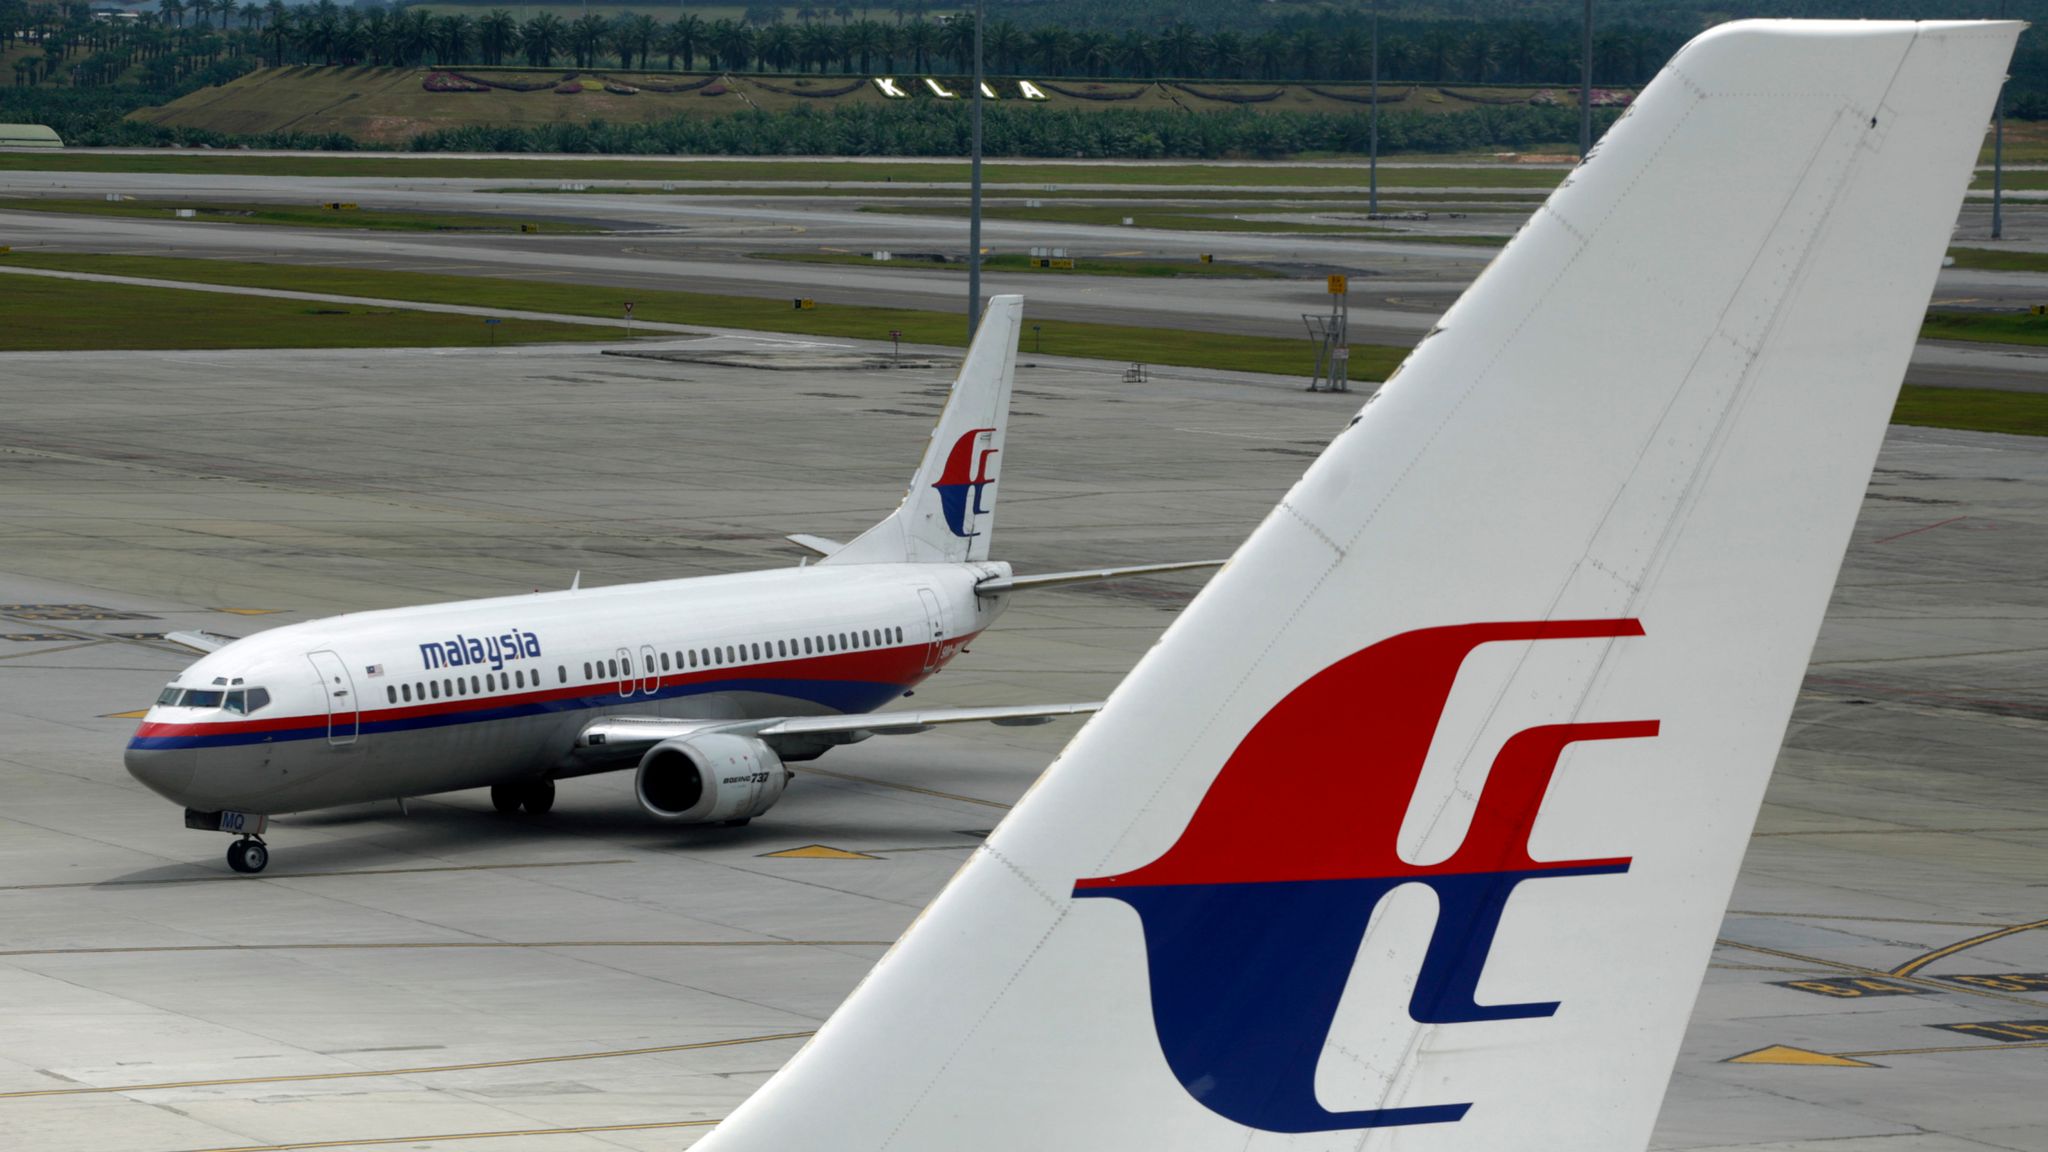 'Final effort' to solve flight MH370 mystery nearly four years after